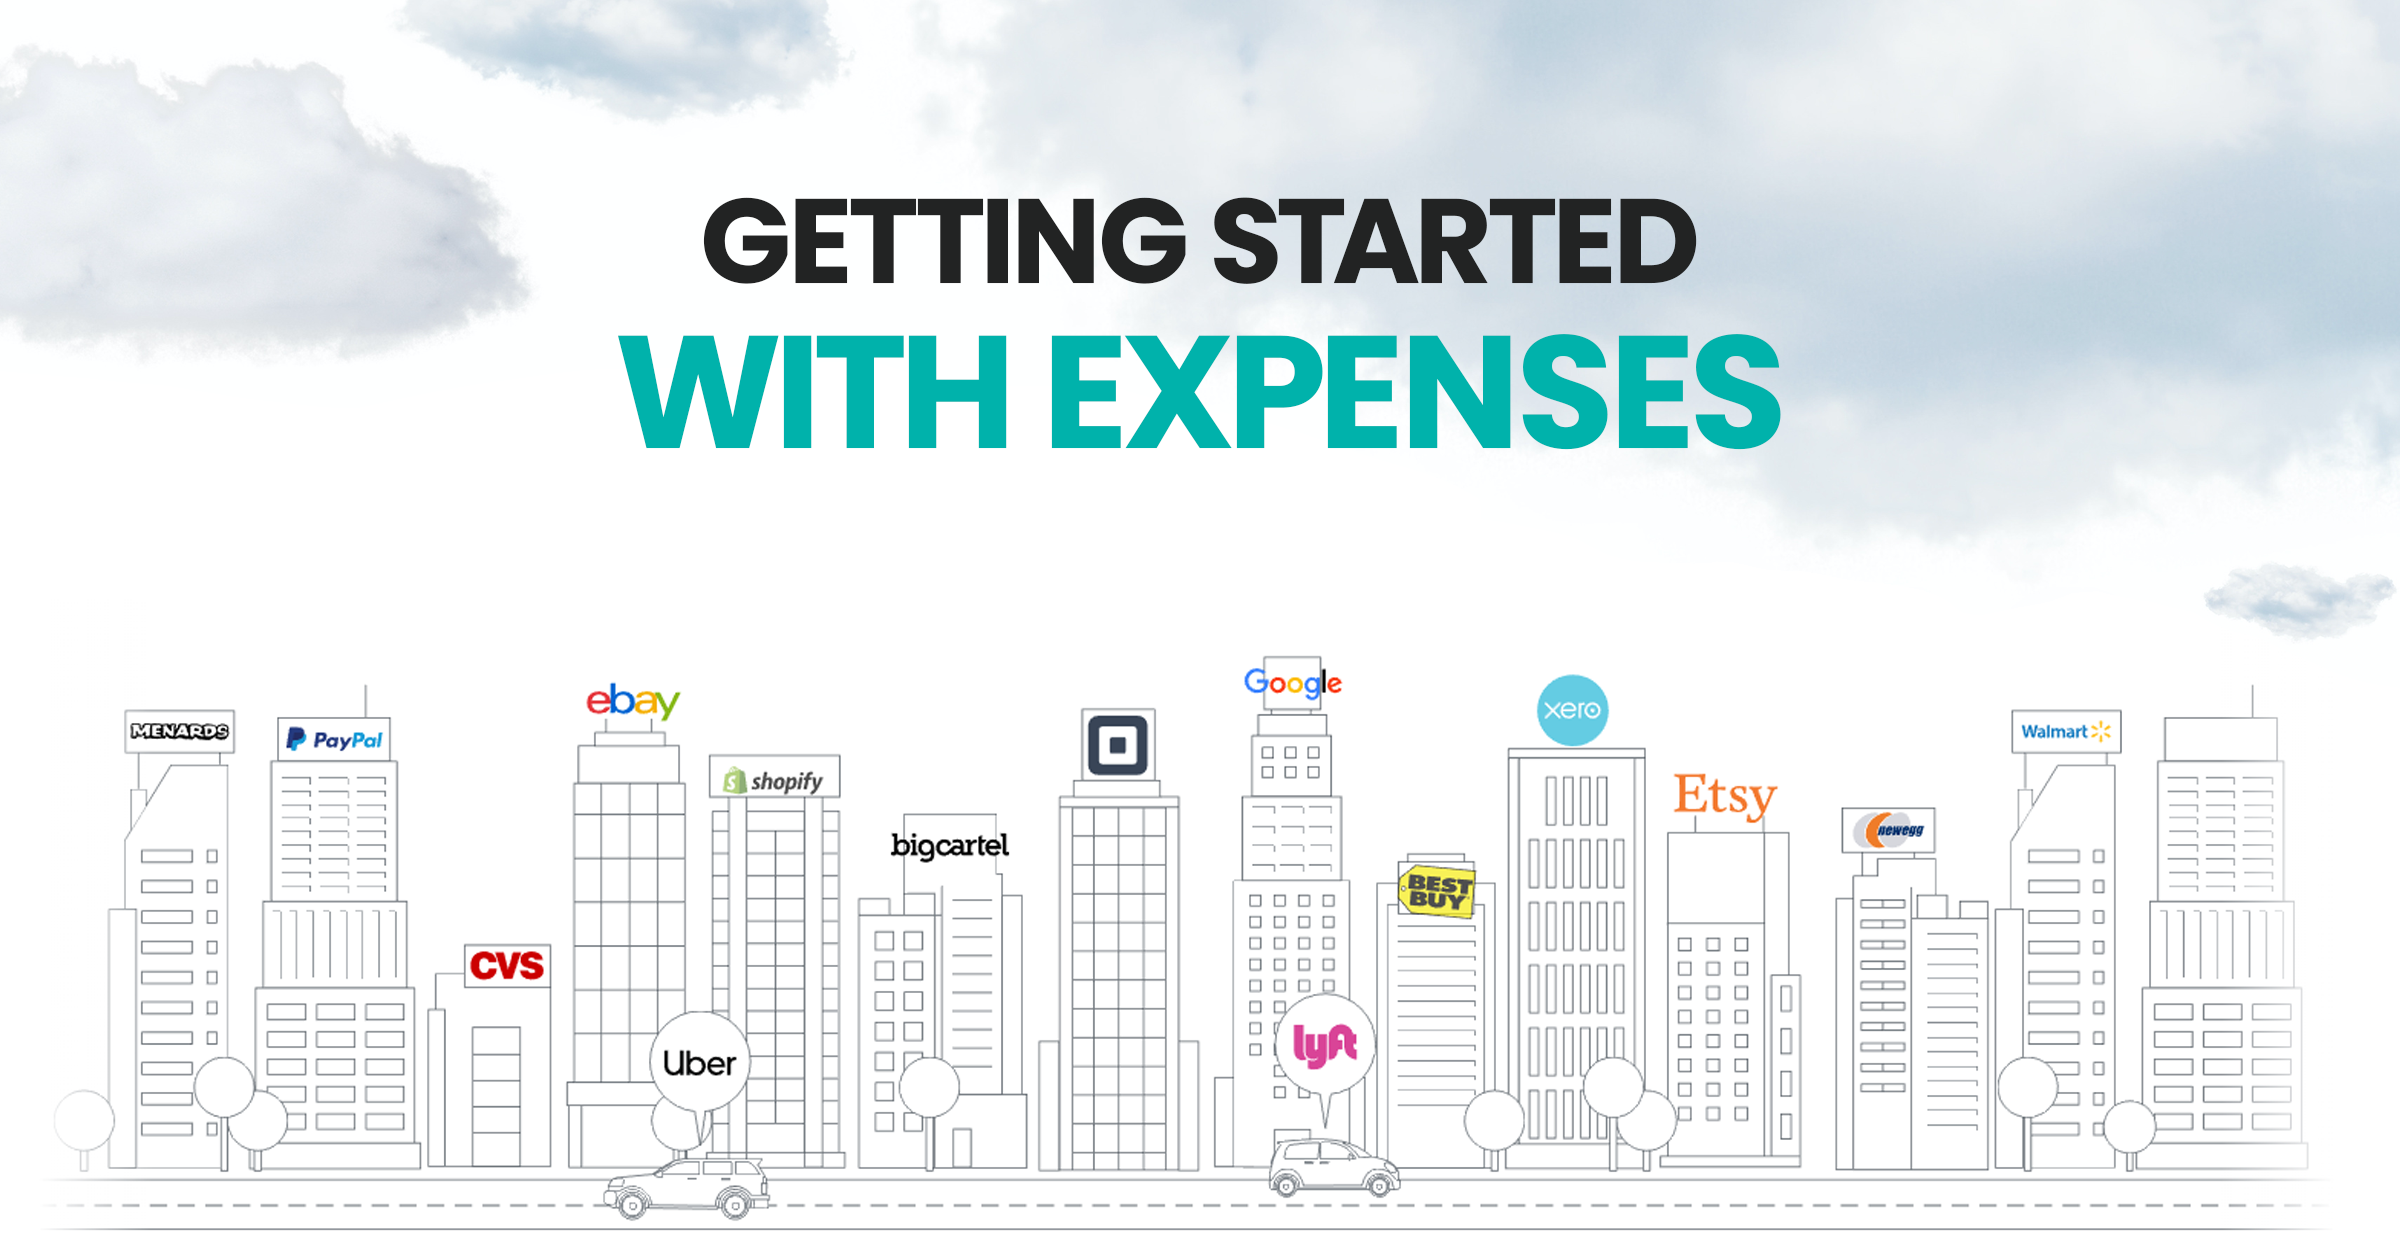 Get Started with Expenses